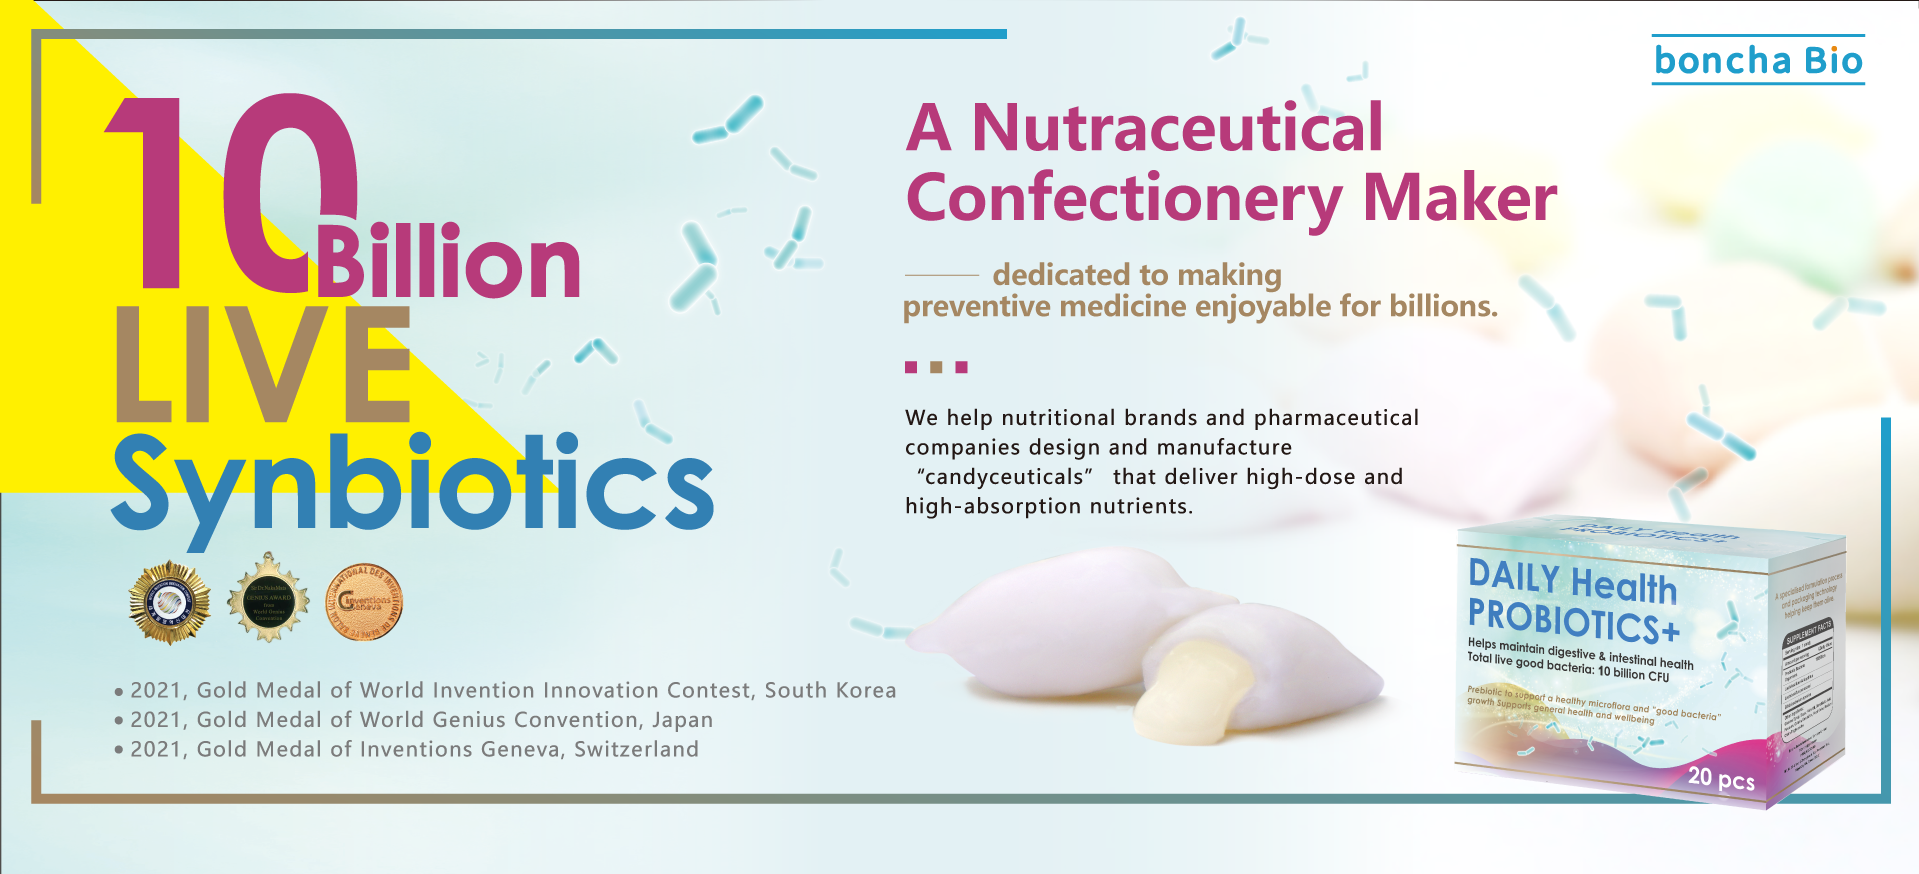 A Nutraceutical Confectionery Maker